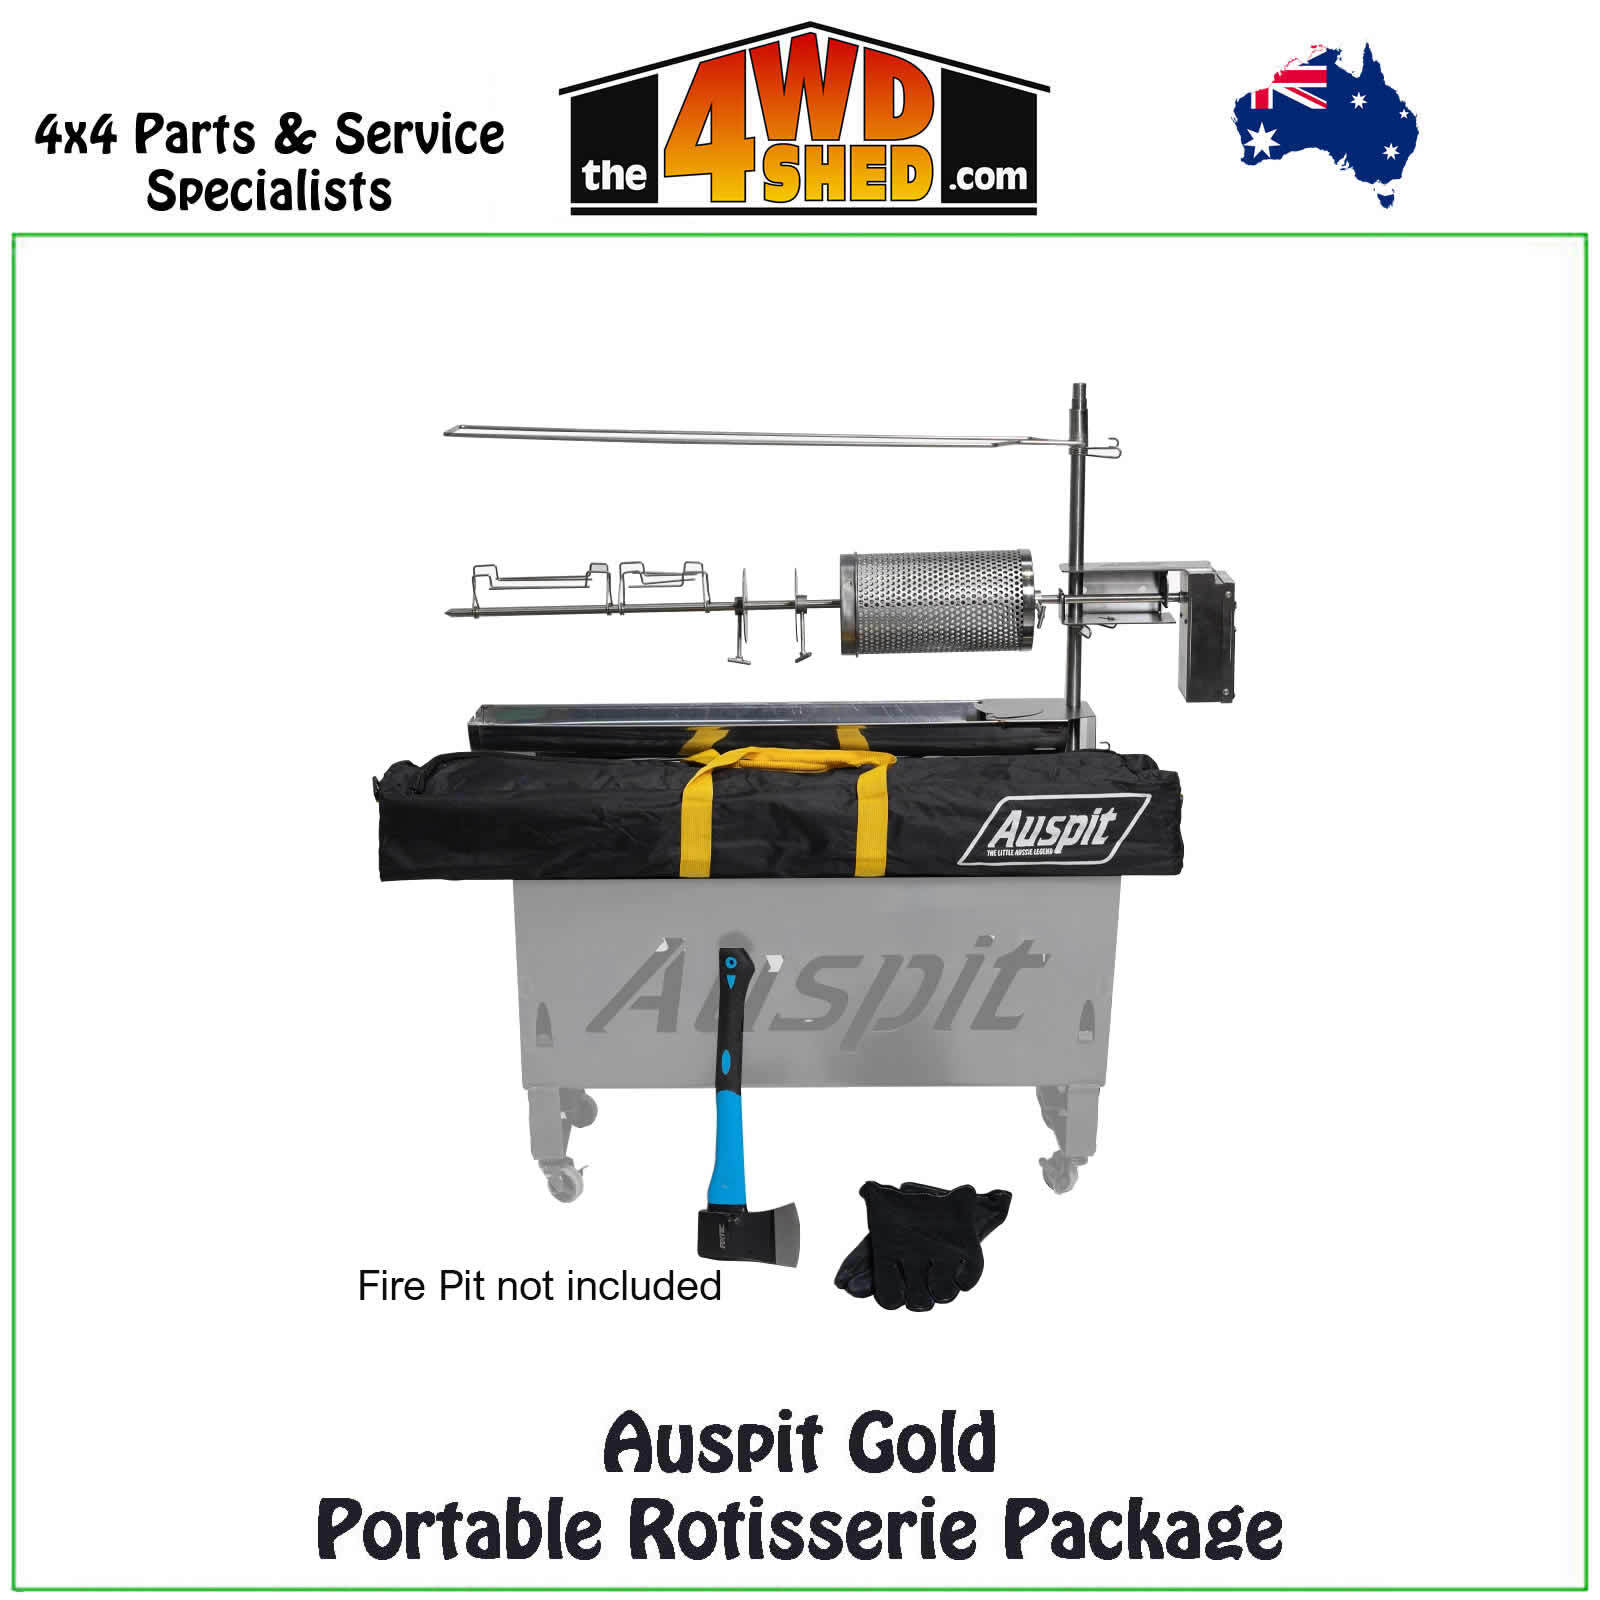 <span style="font-size: 18px;">Auspit Gold Portable Rotisserie Package</span>